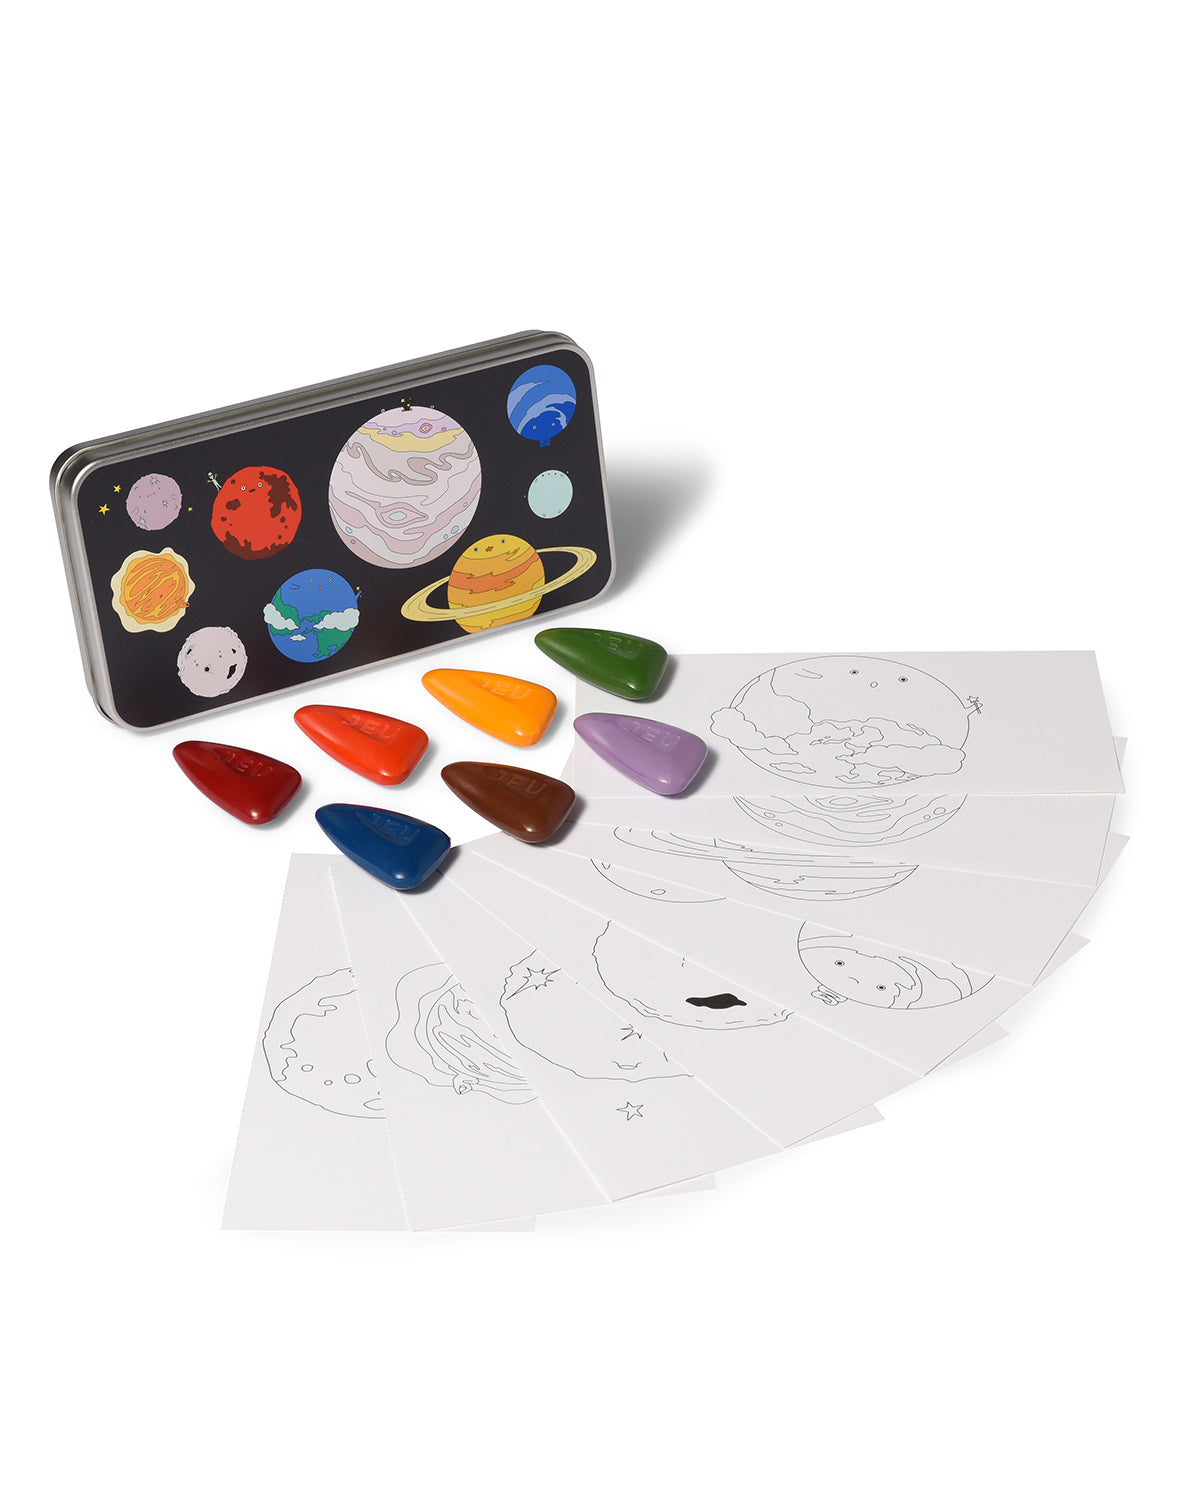 Coloring Kit - 3 units in set - SOLAR SYSTEM Large